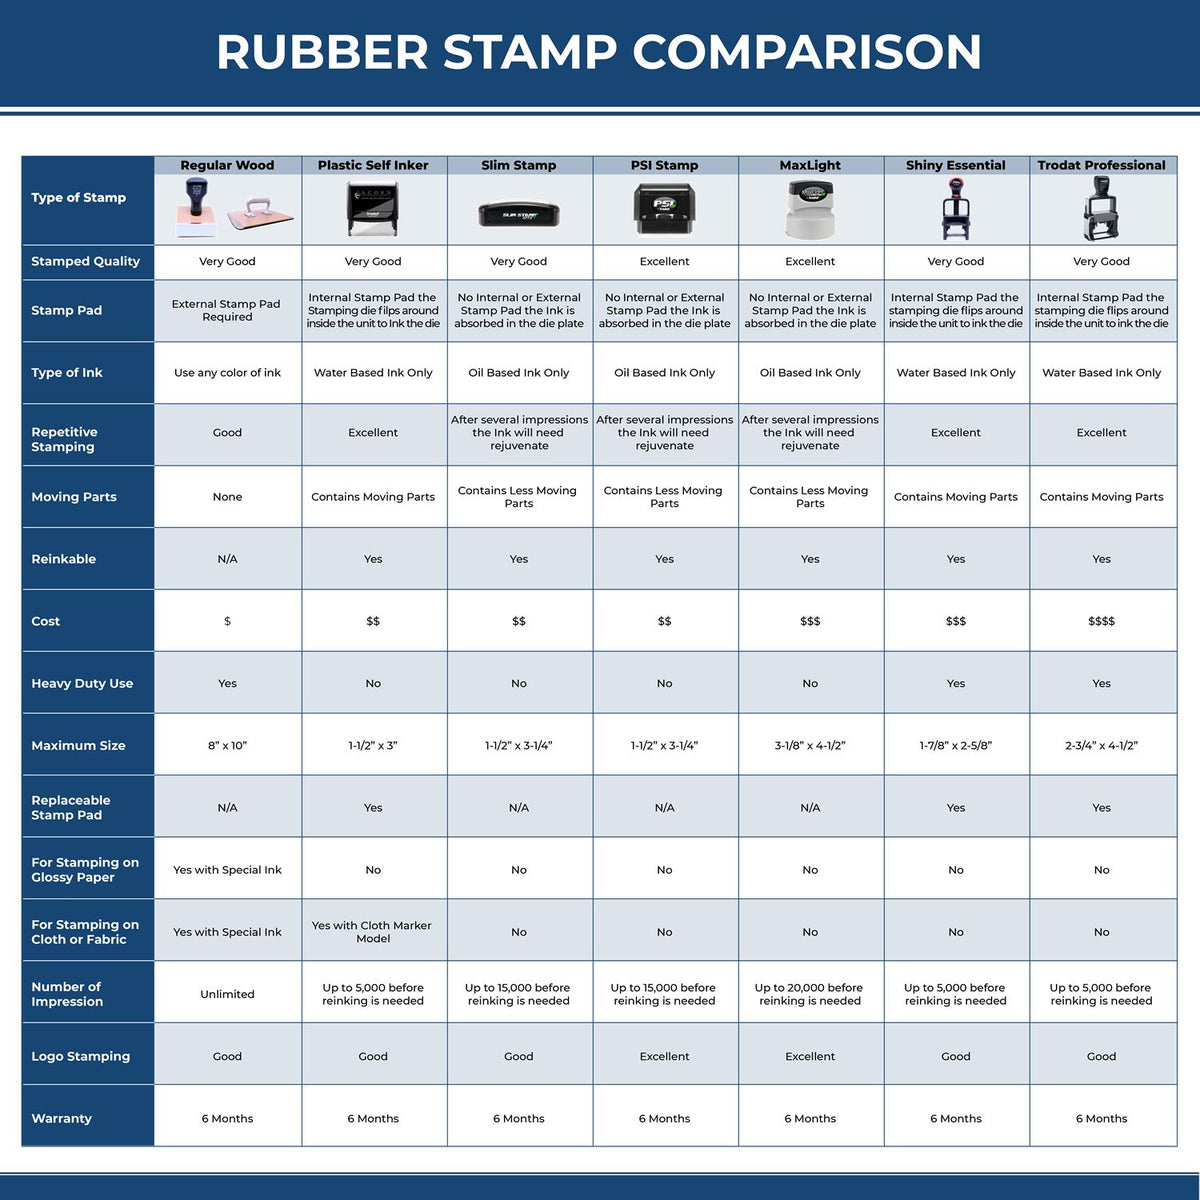 Large Rejected Rubber Stamp 4150R Rubber Stamp Comparison